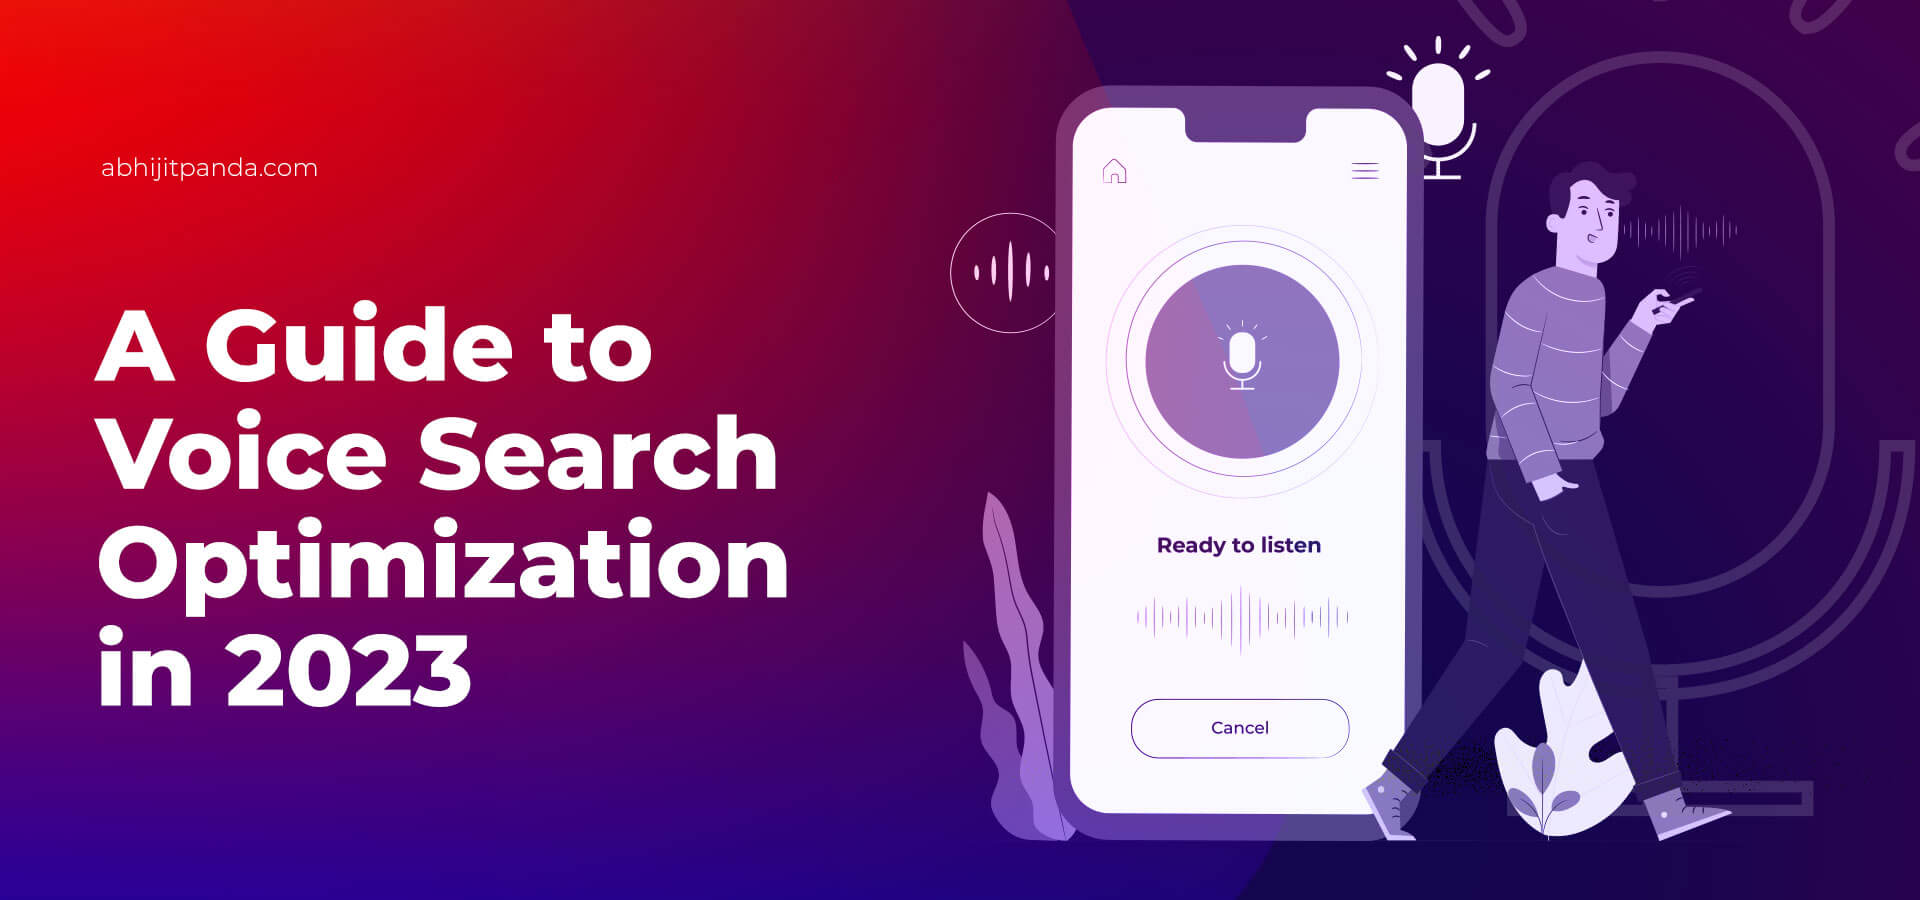 Guide to Voice Search Optimization in 2023